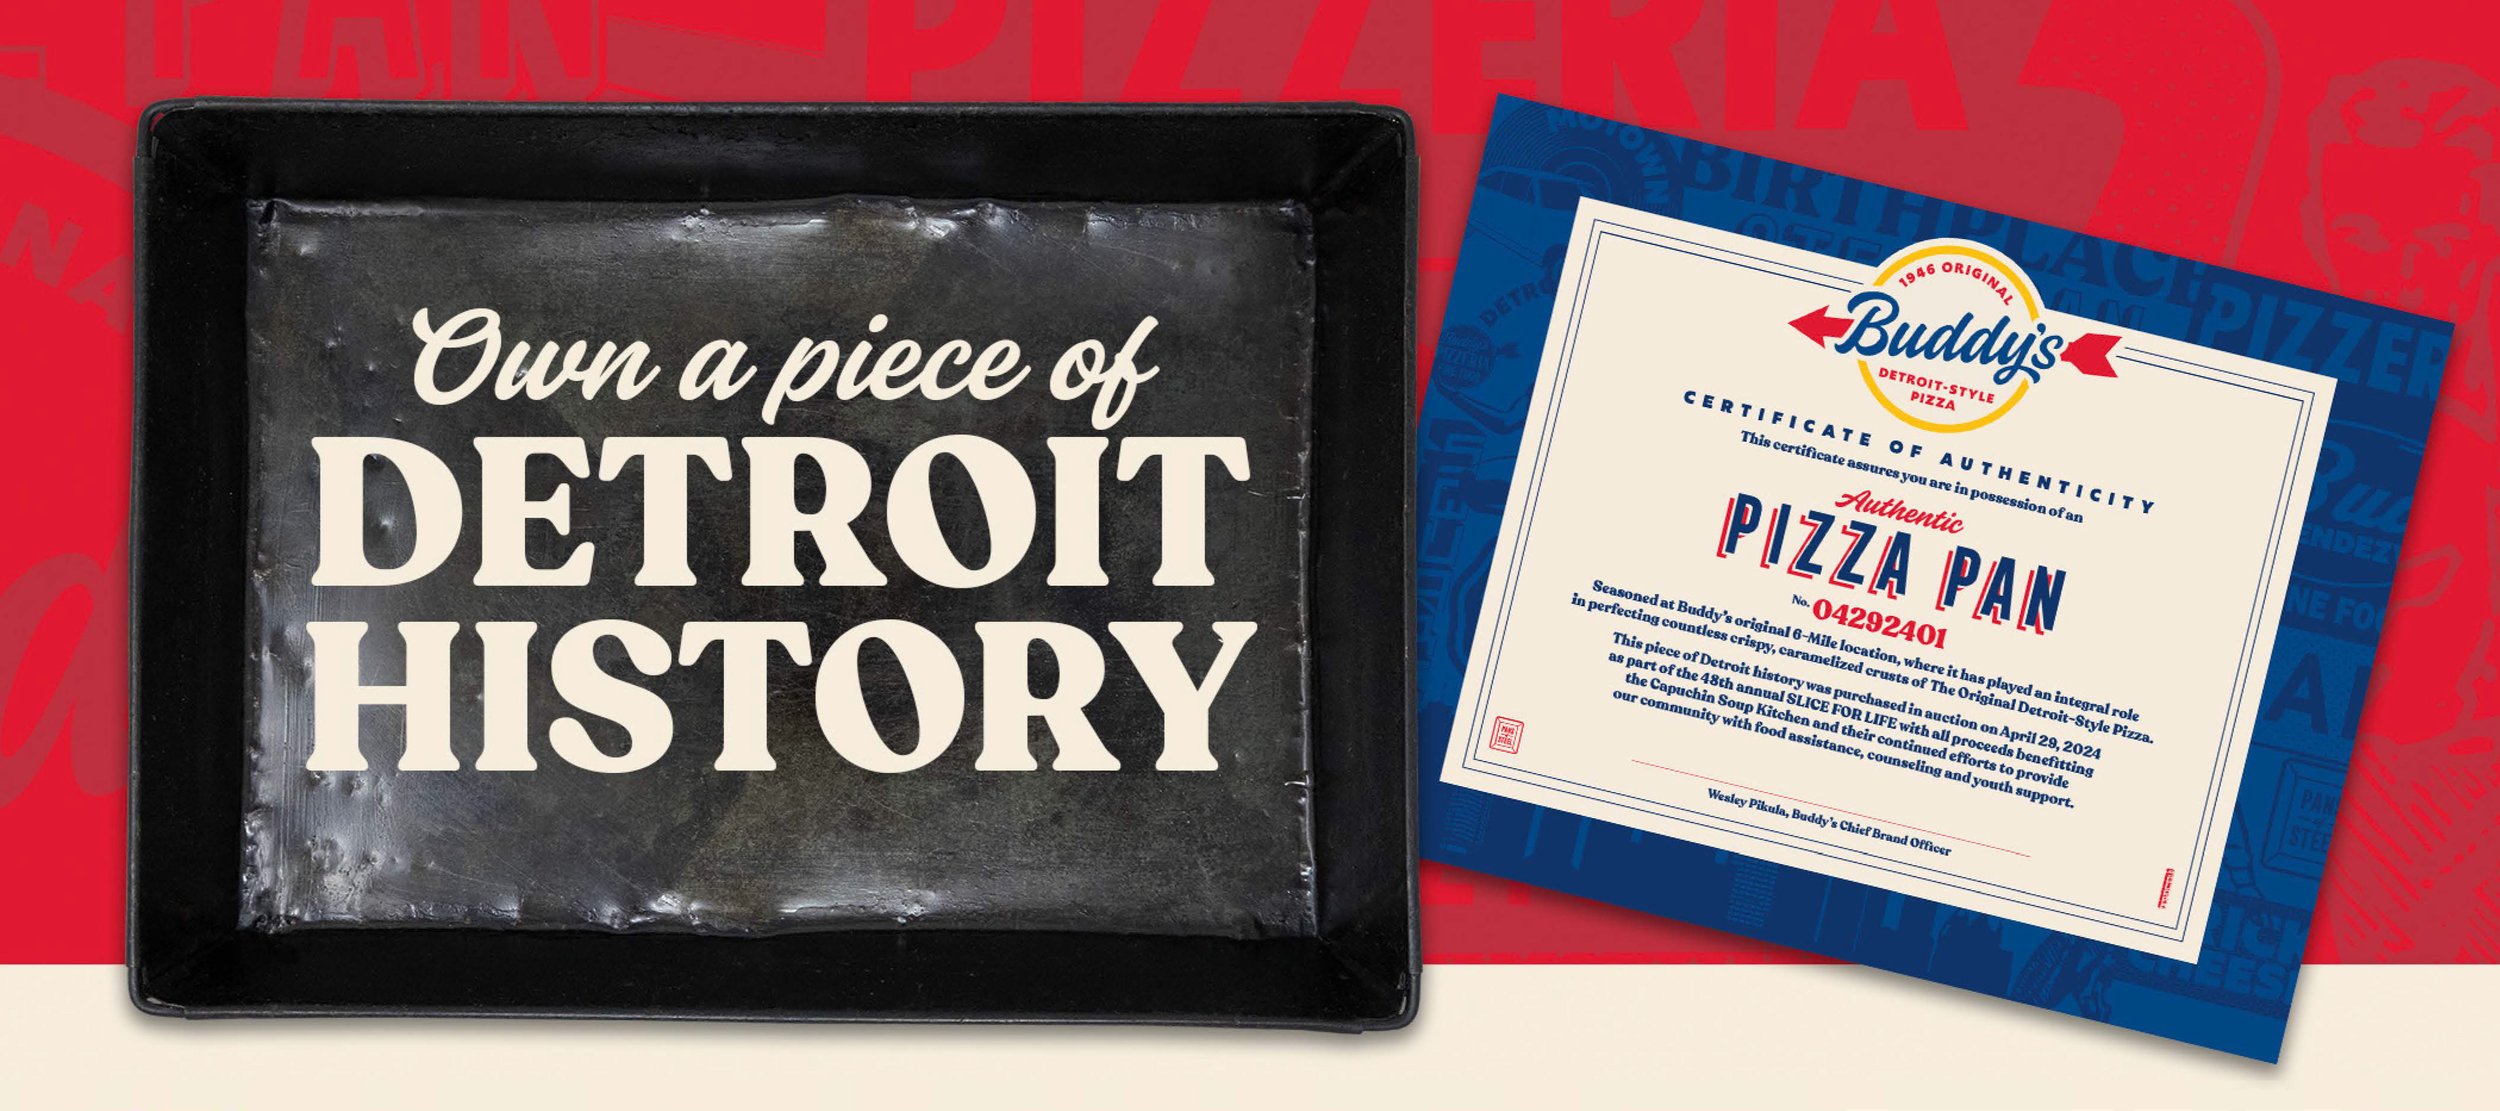 Own a piece of Detroit history!